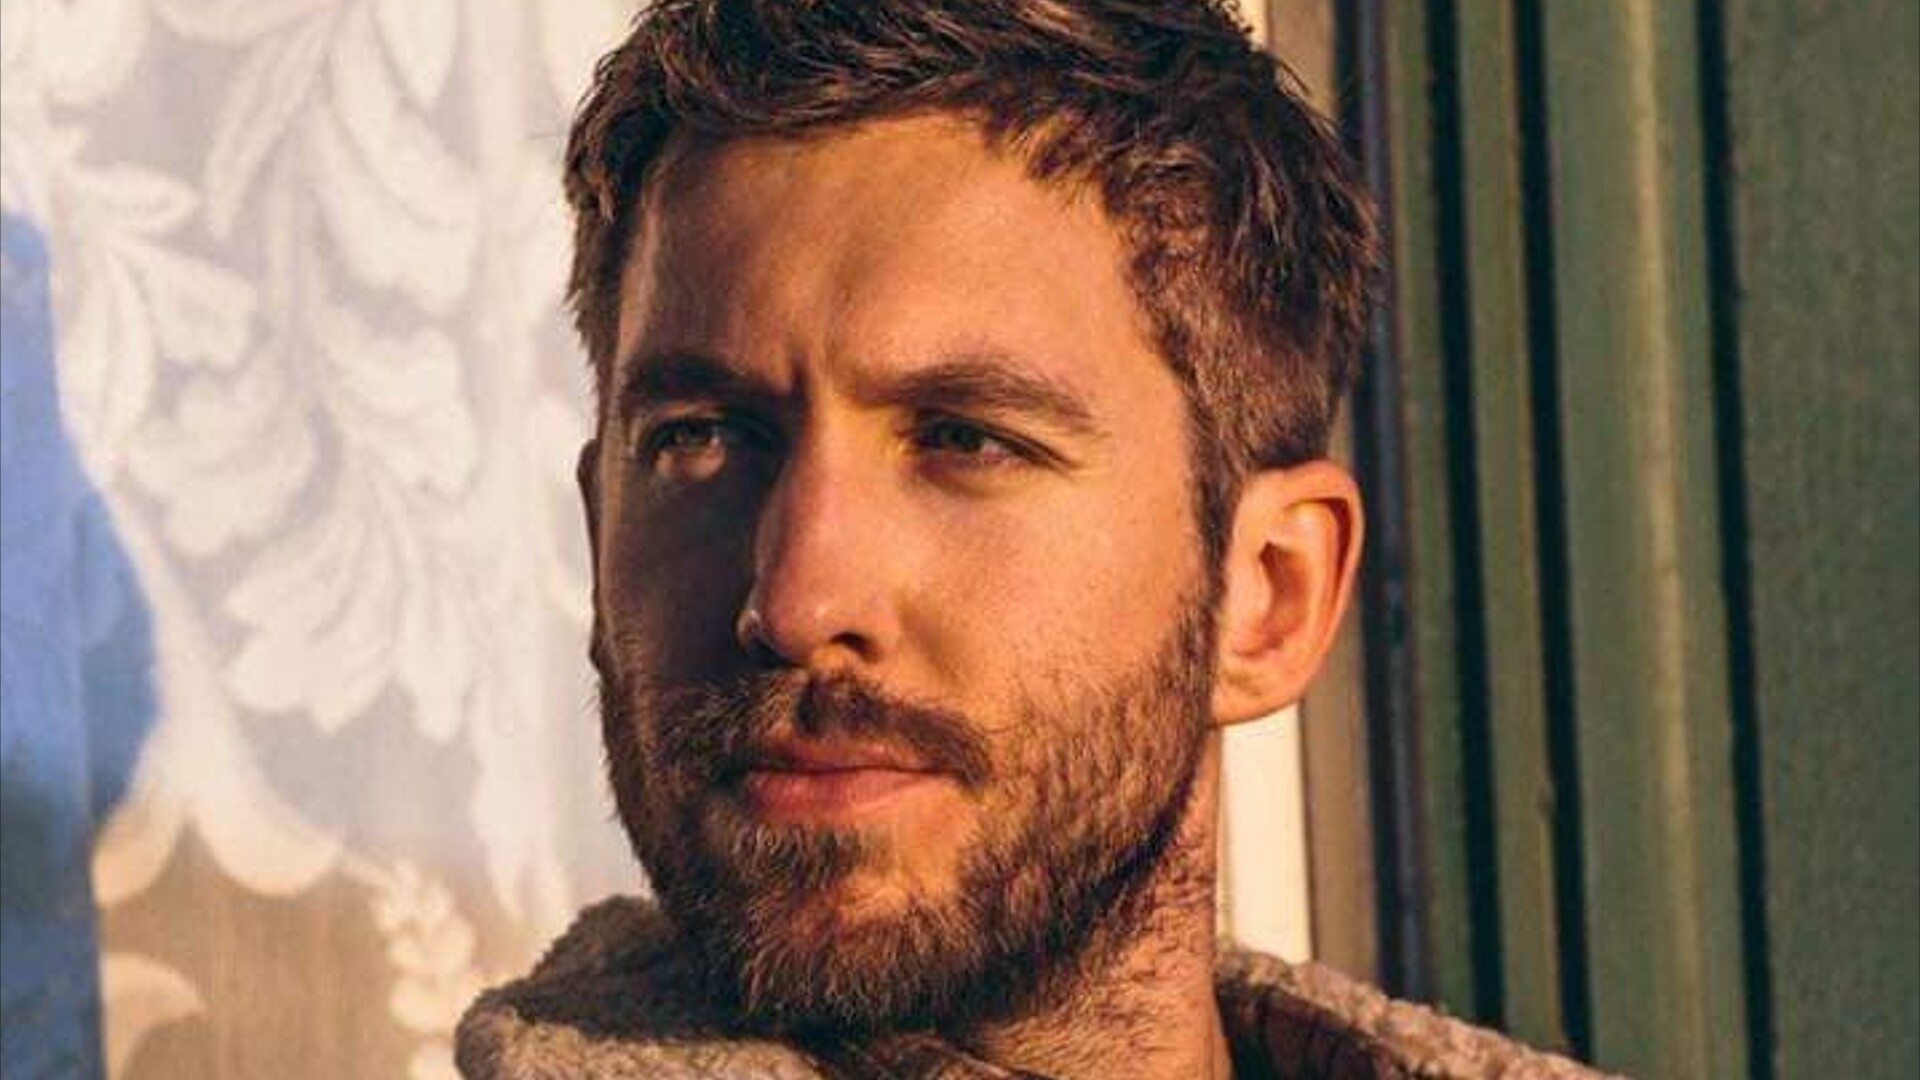 Calvin Harris: Summer anthem, "By Your Side", featuring English singer Tom Grennan, was released on 4 June 2021. 1920x1080 Full HD Background.